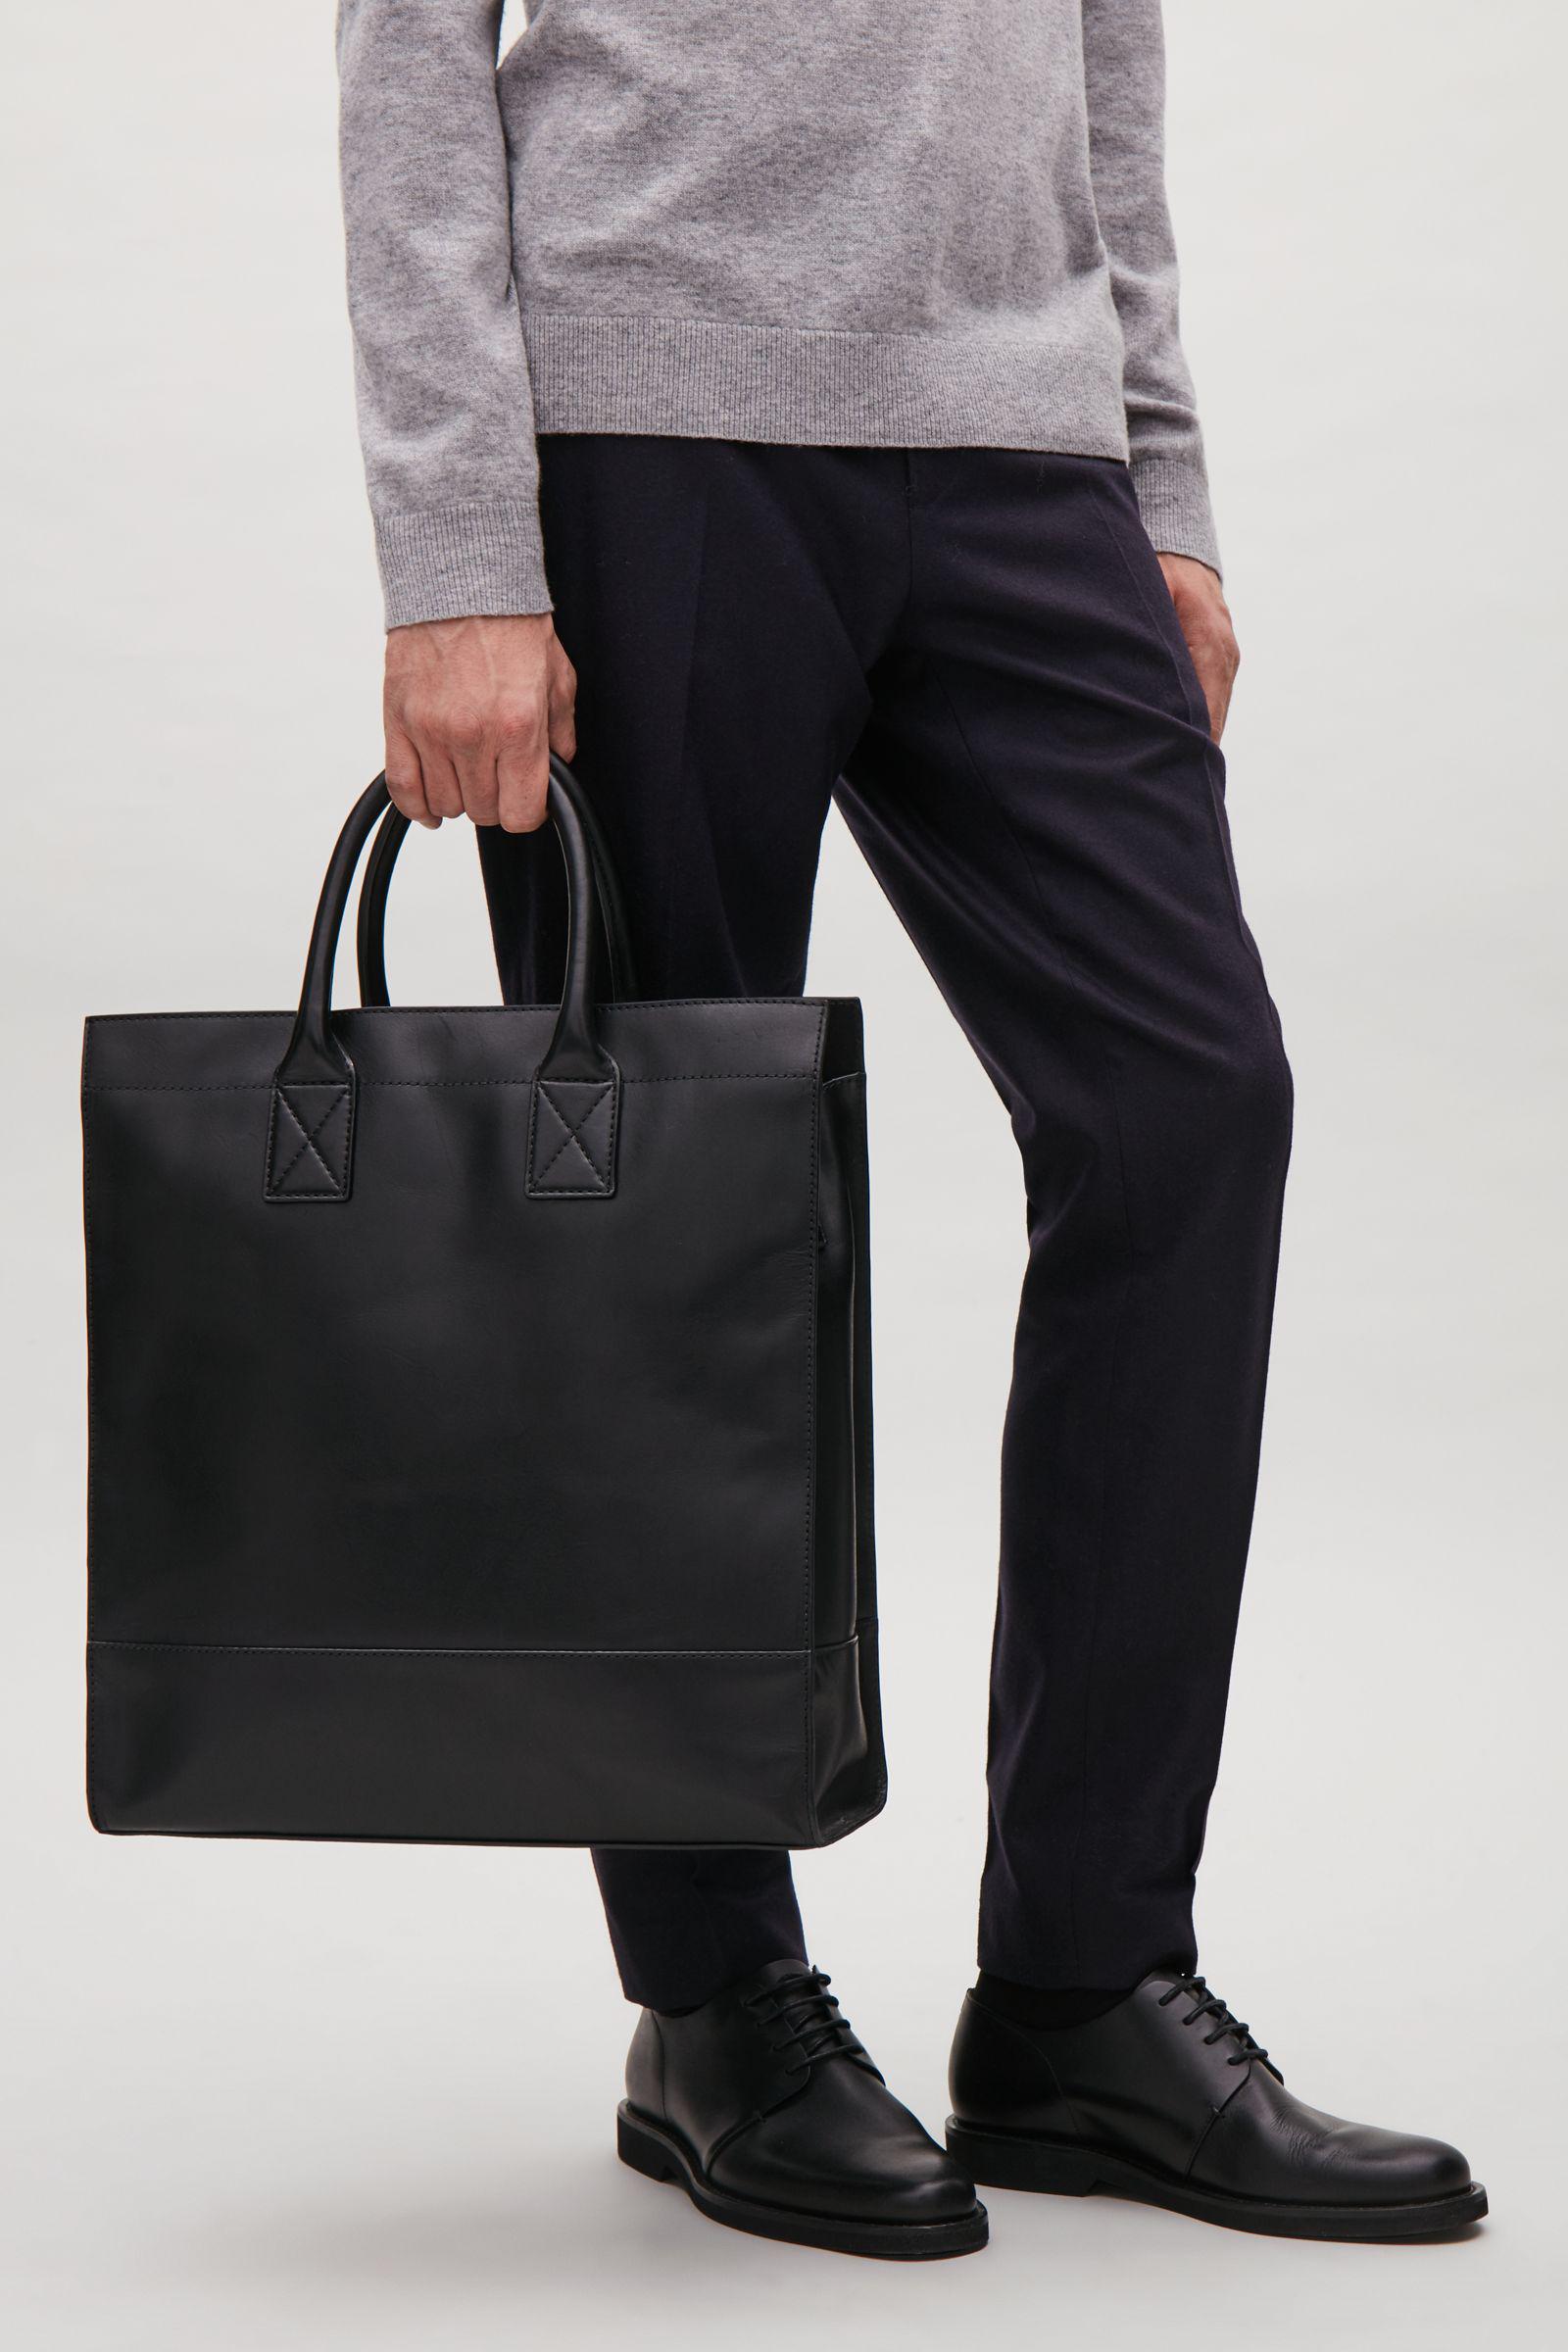 Lyst Cos Leather Tote Bag in Black for Men